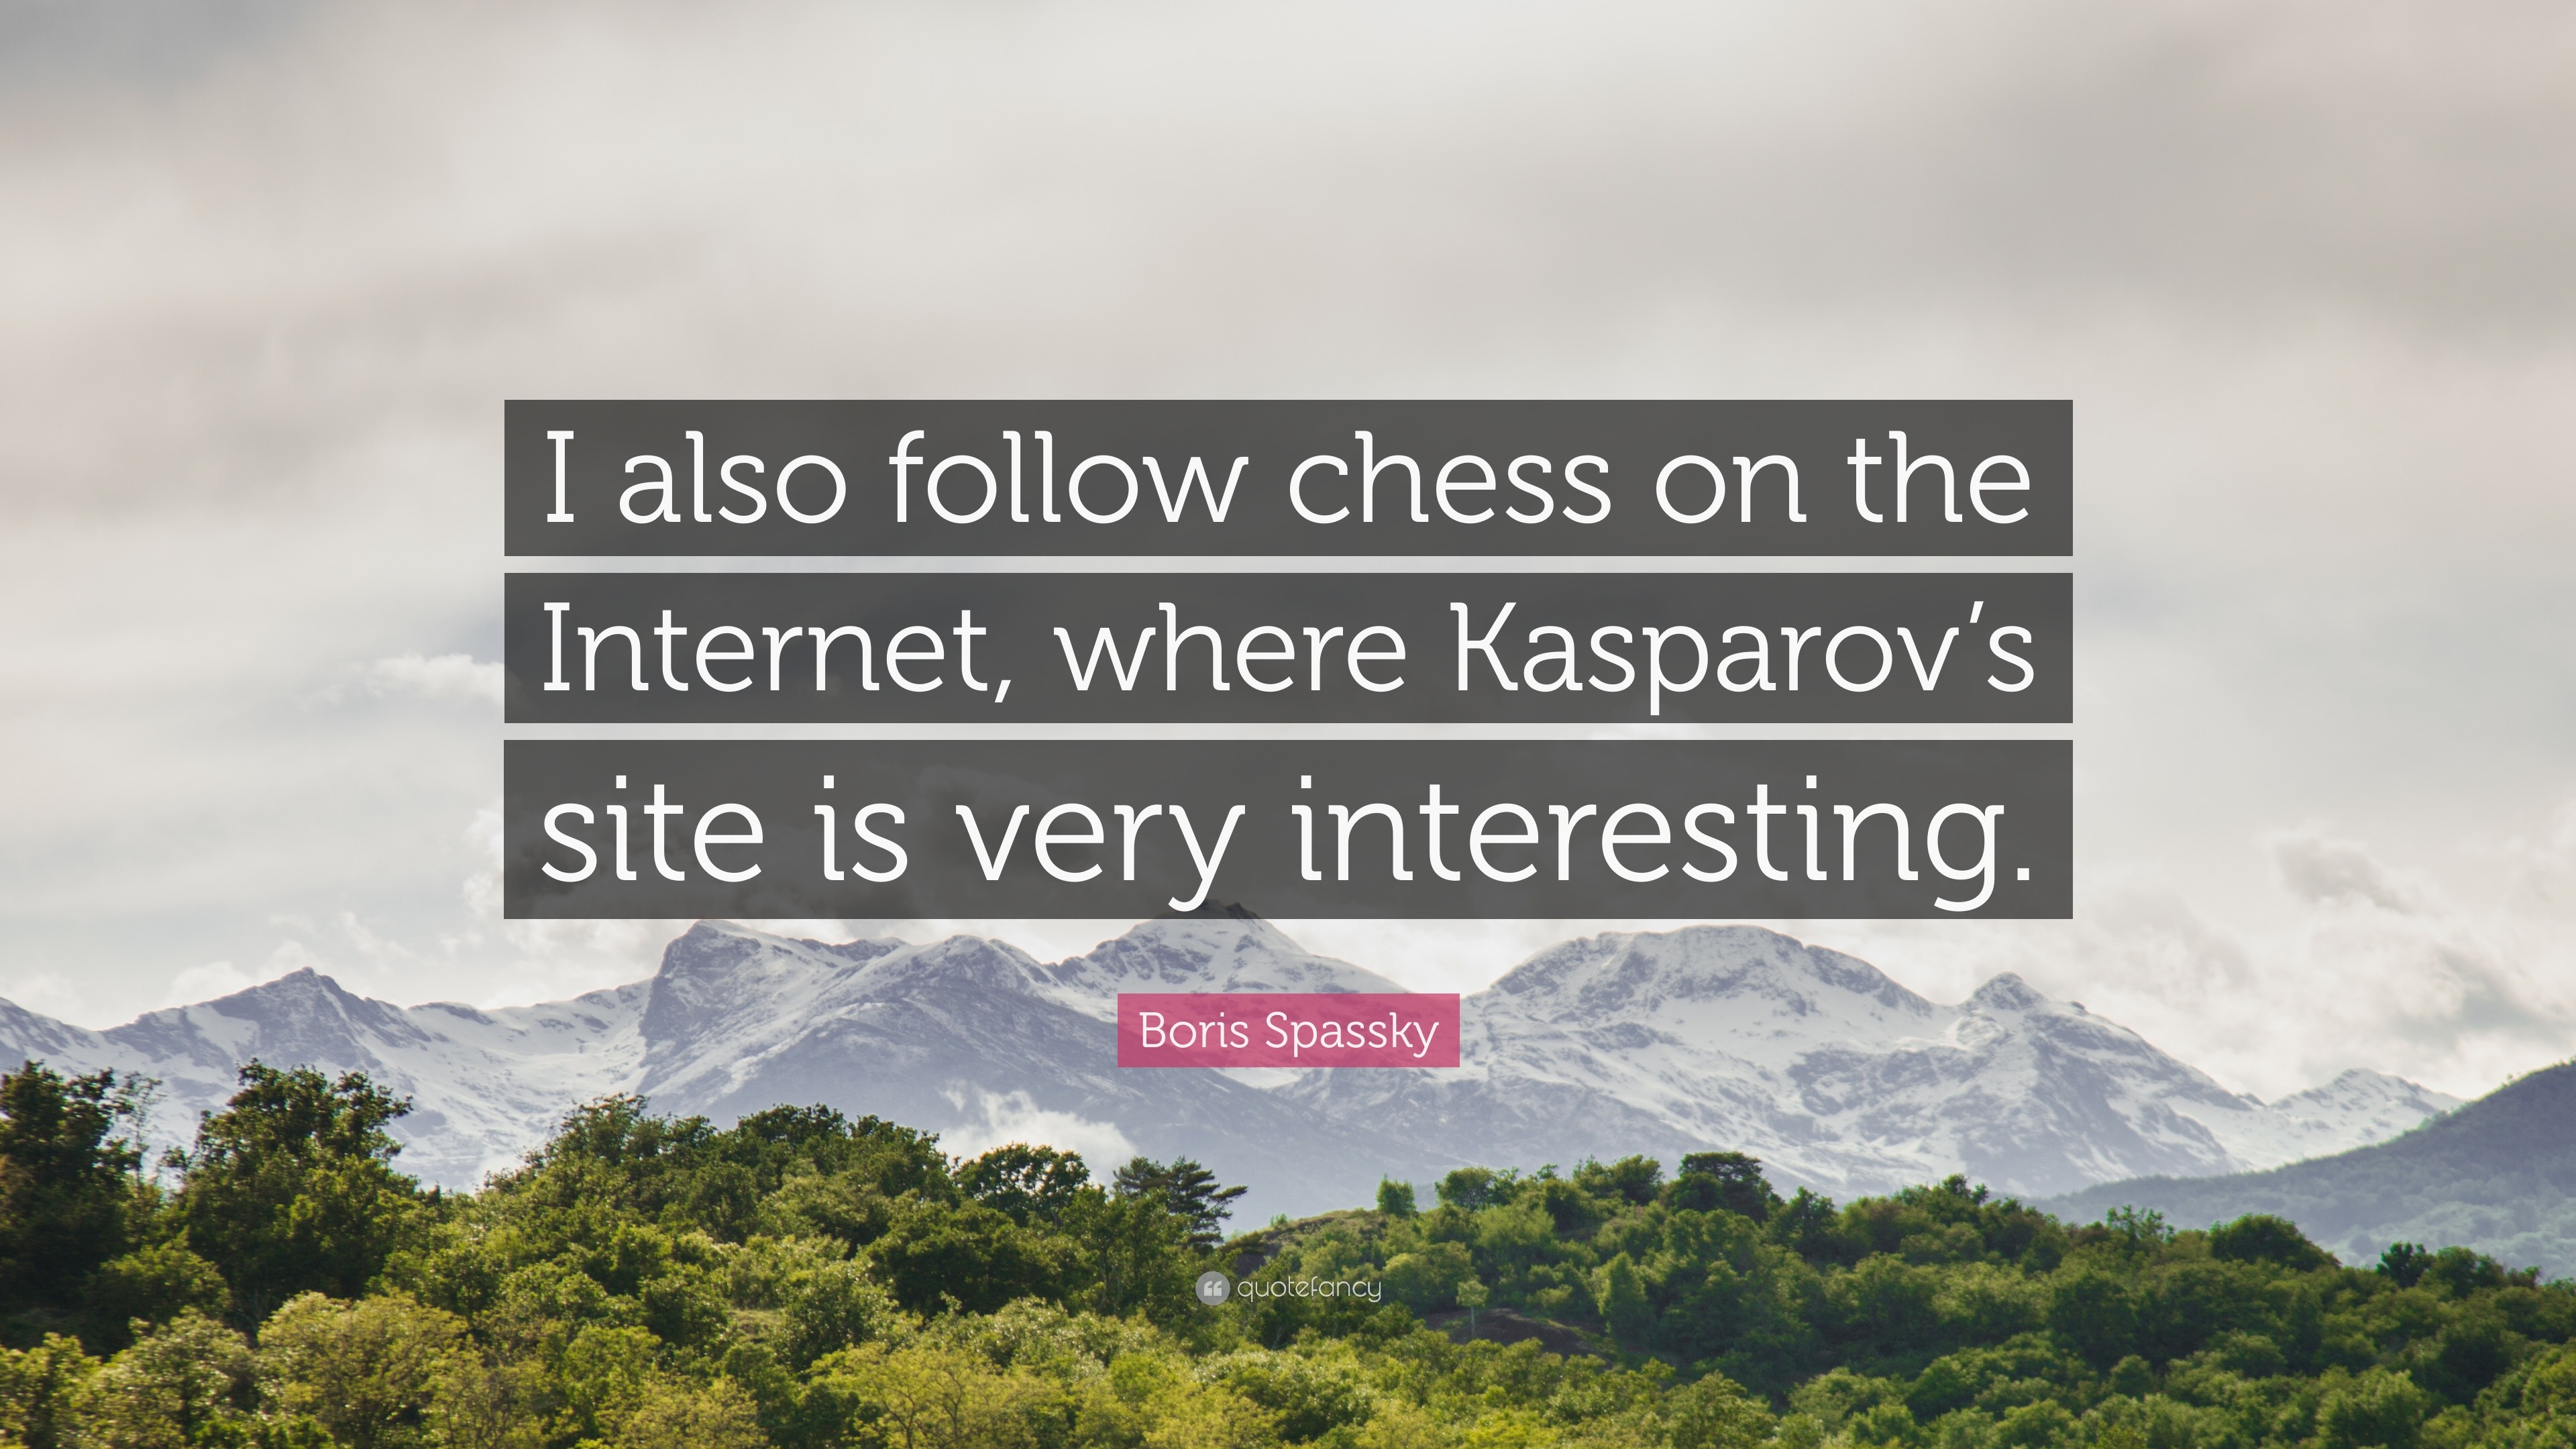 Boris Spassky quote: I also follow chess on the Internet, where